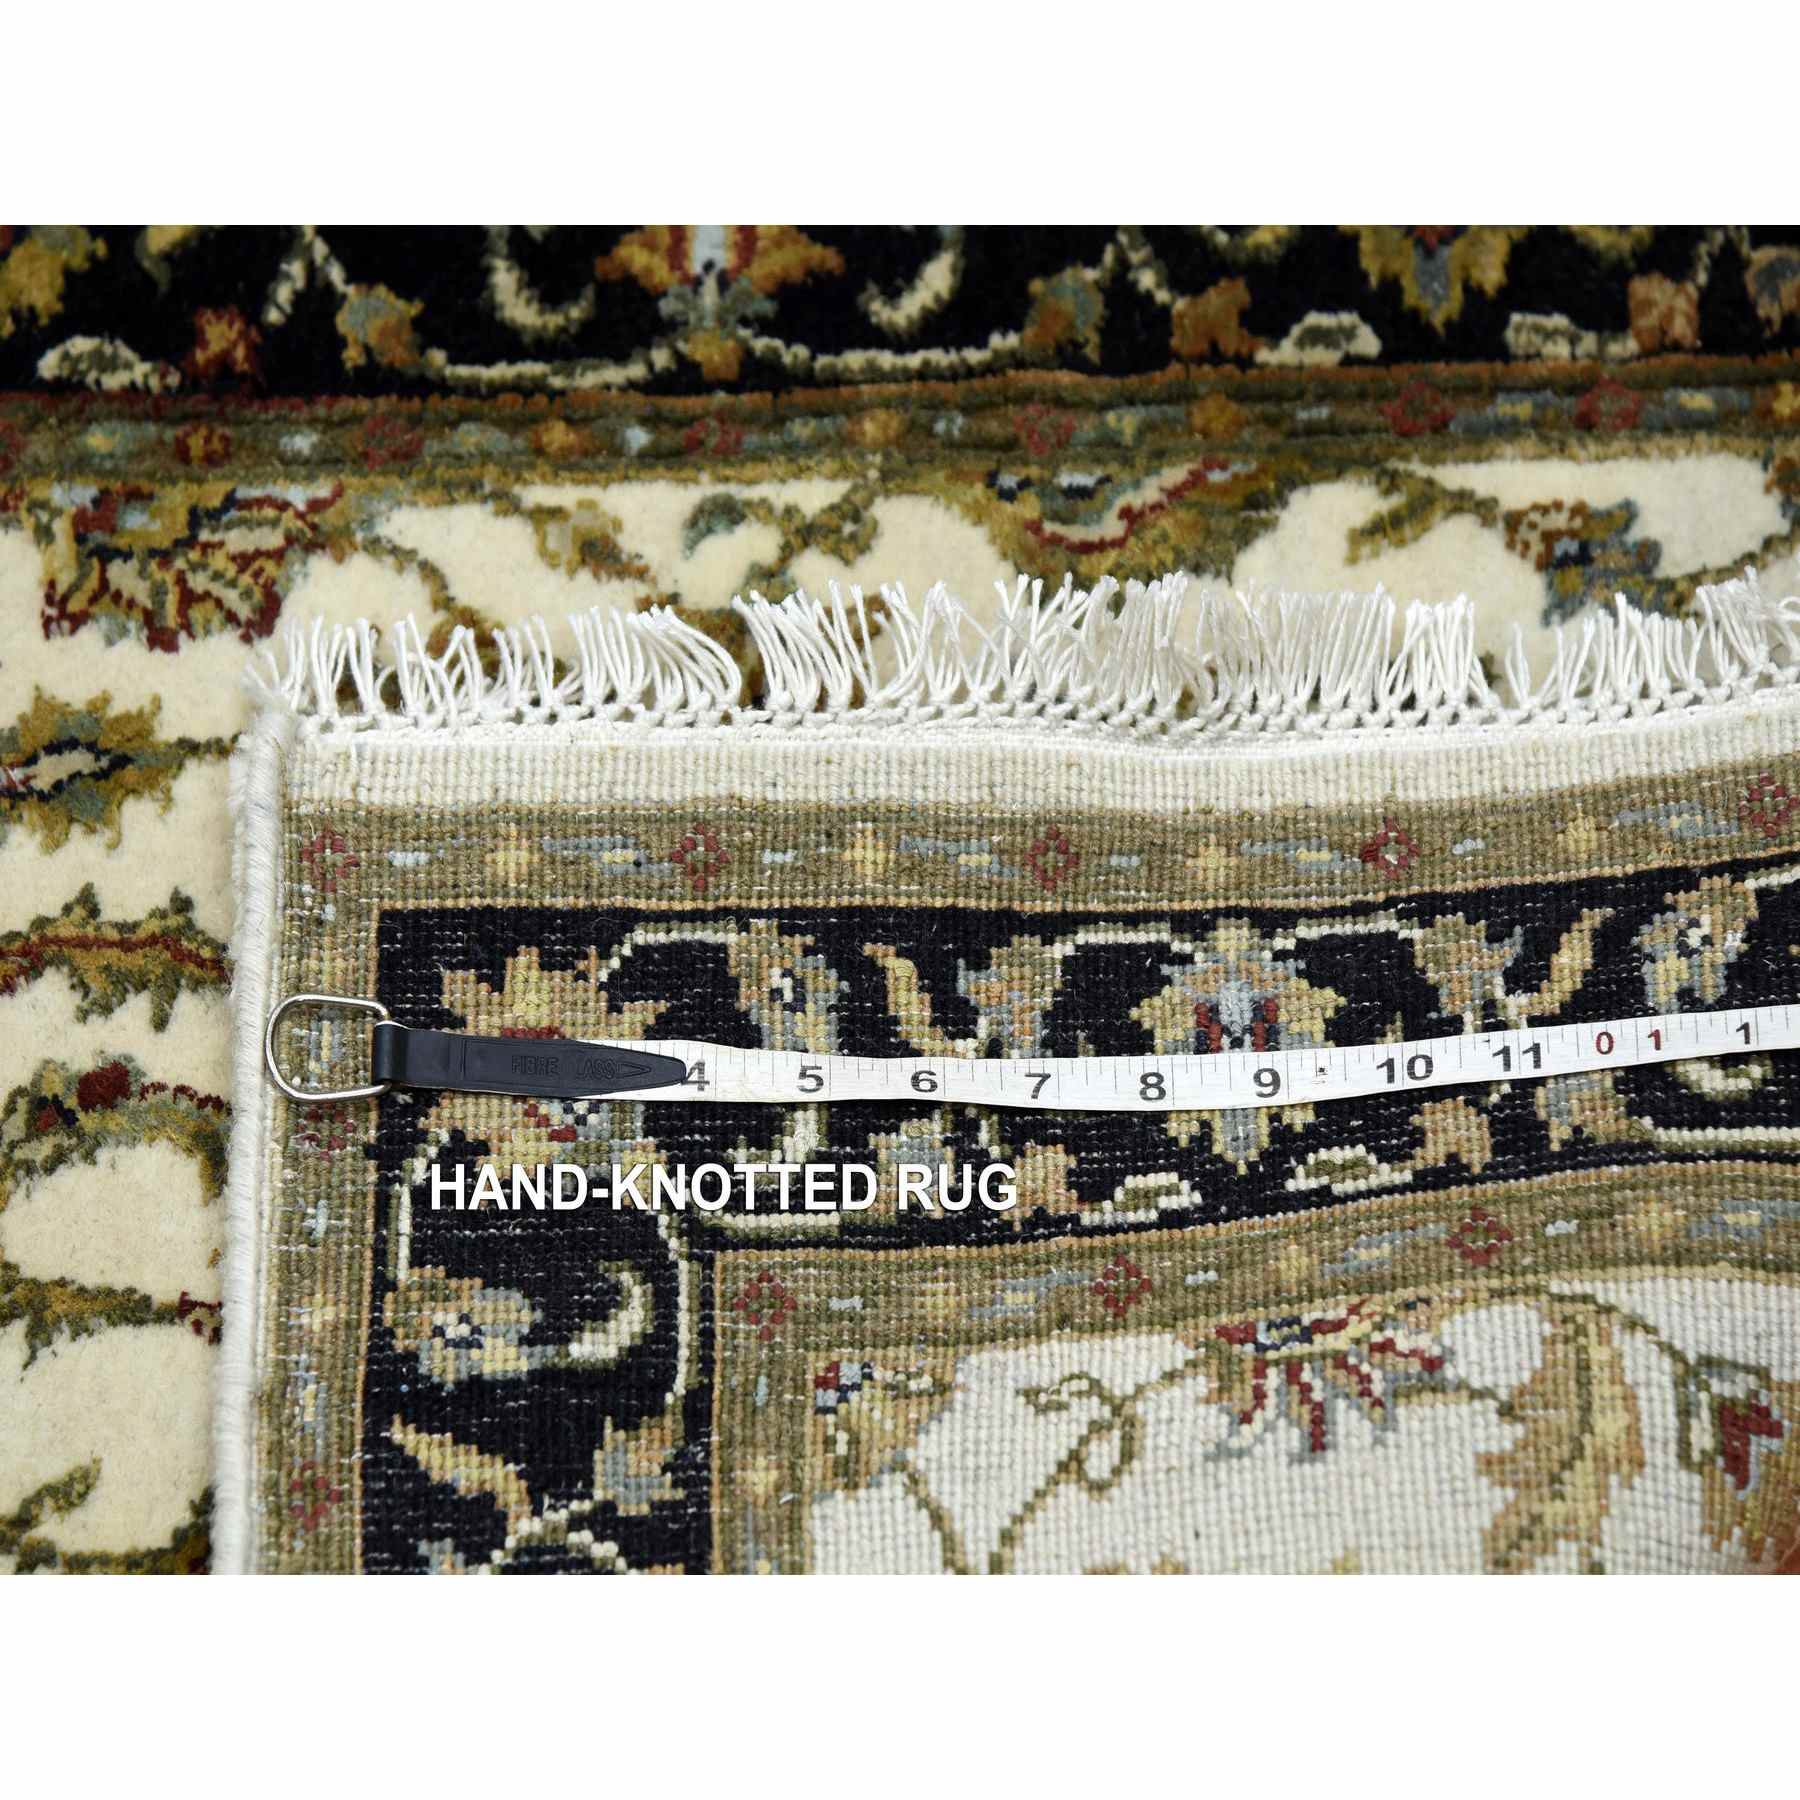 Rajasthan-Hand-Knotted-Rug-376385